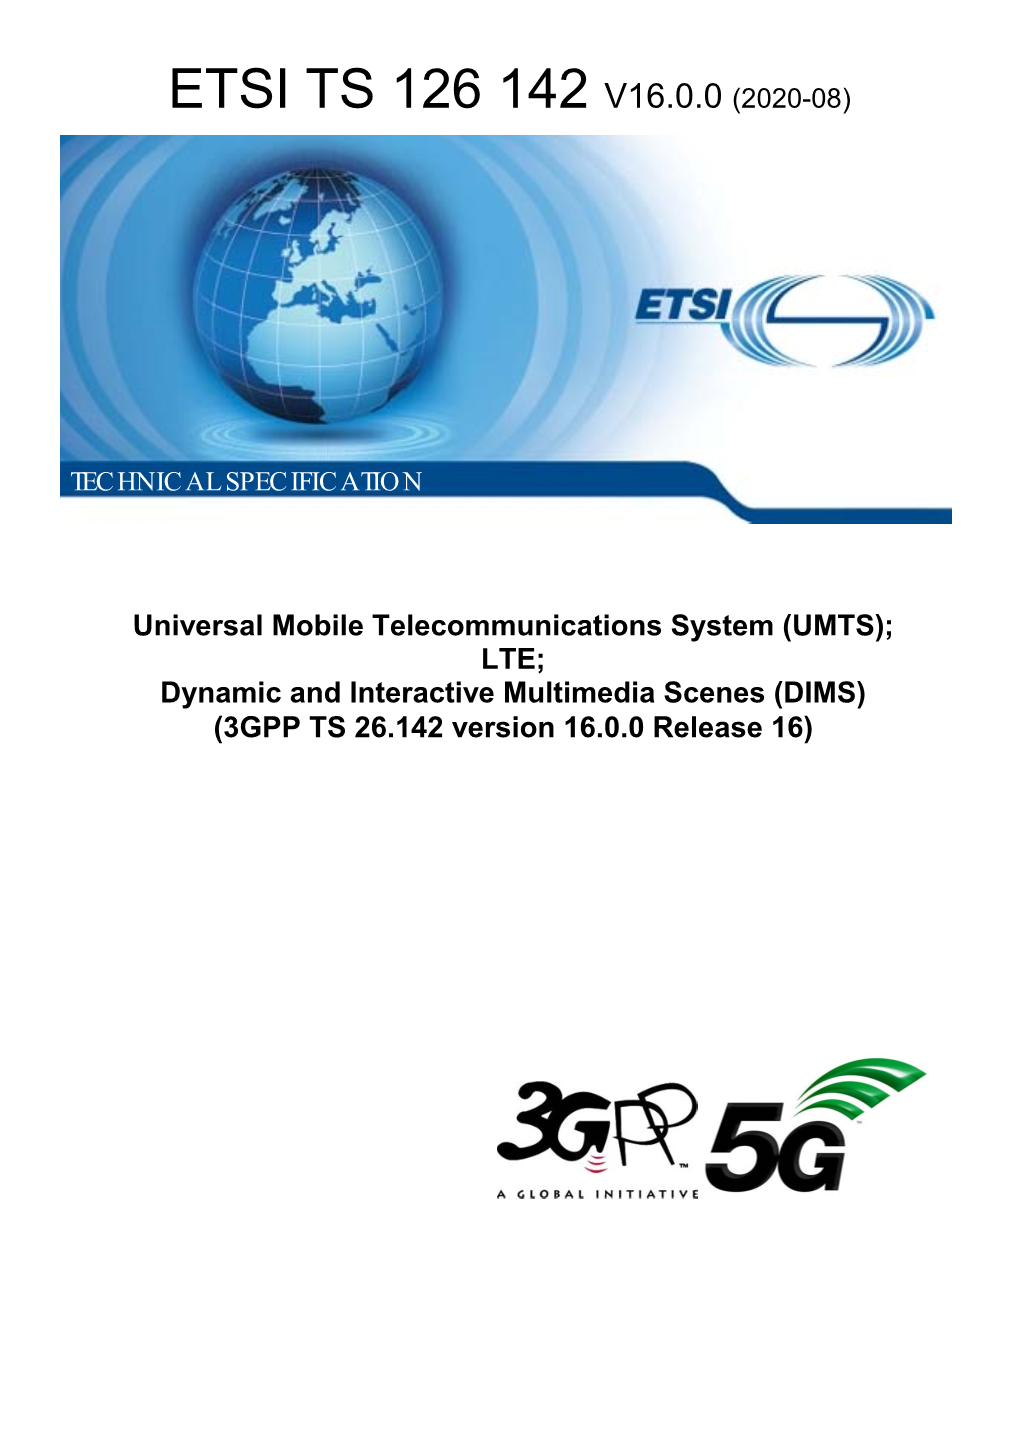 UMTS); LTE; Dynamic and Interactive Multimedia Scenes (DIMS) (3GPP TS 26.142 Version 16.0.0 Release 16